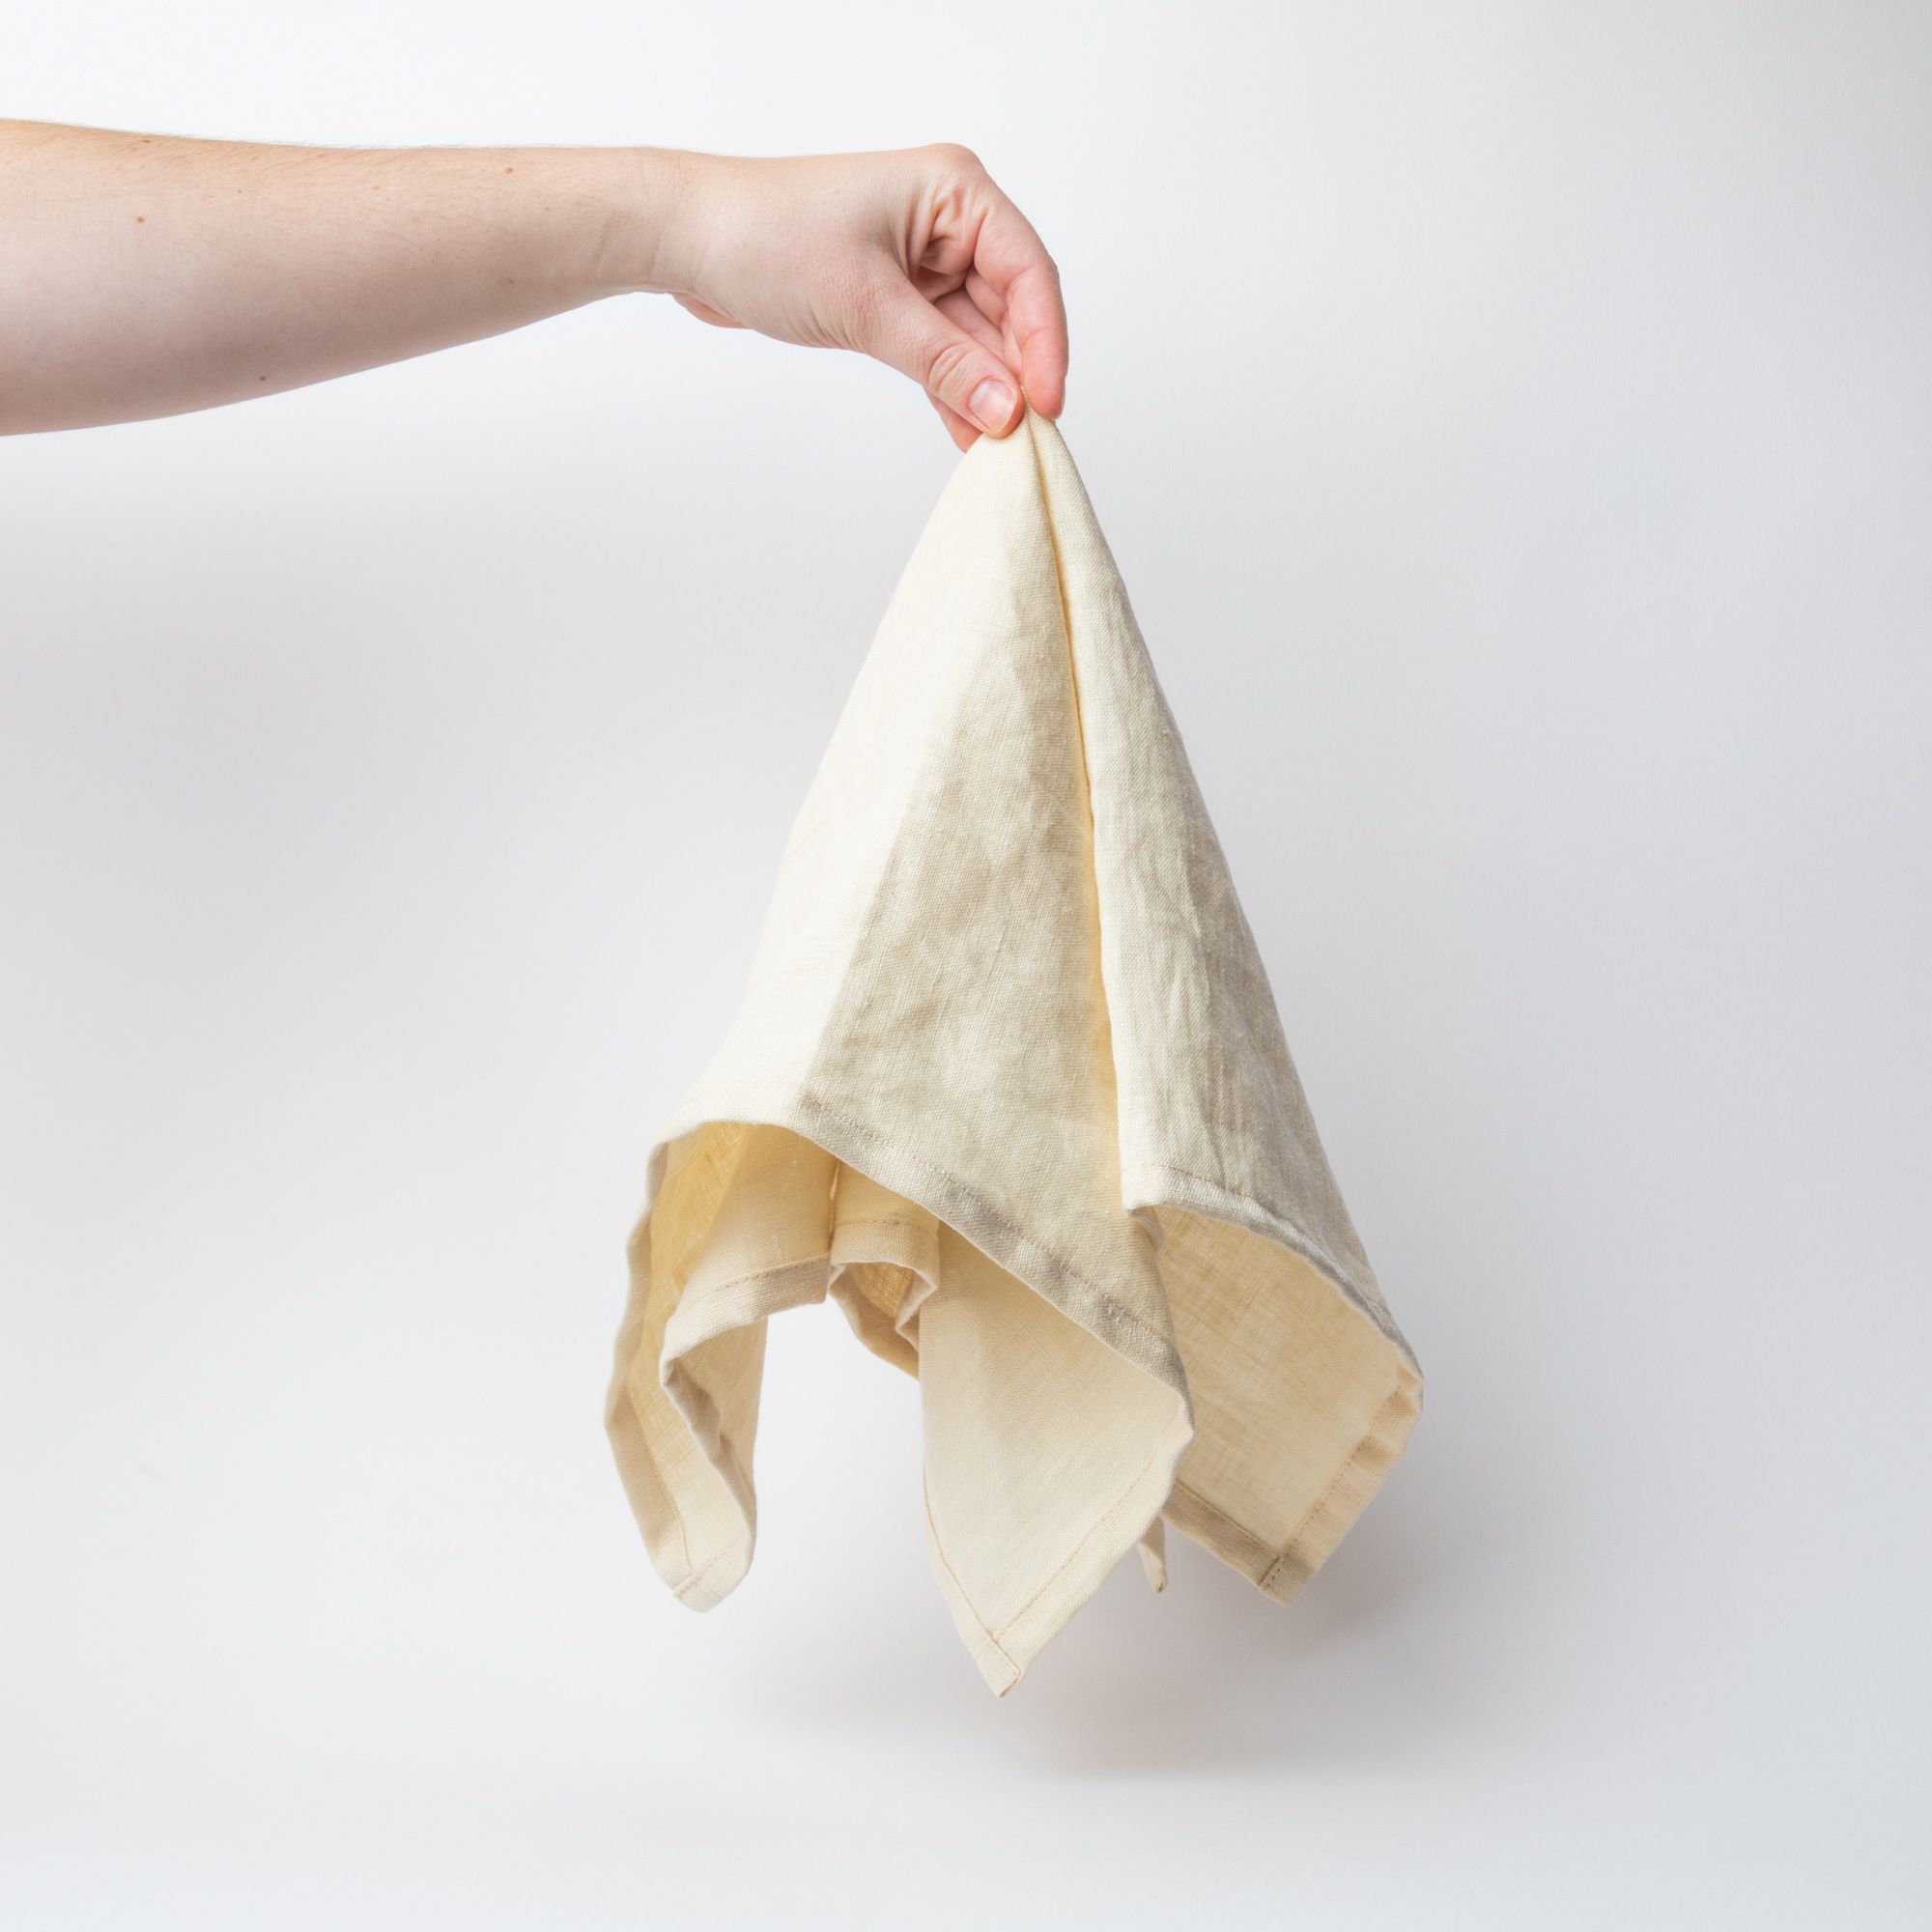 Hand holding a linen napkin in a soft butter yellow from the center 